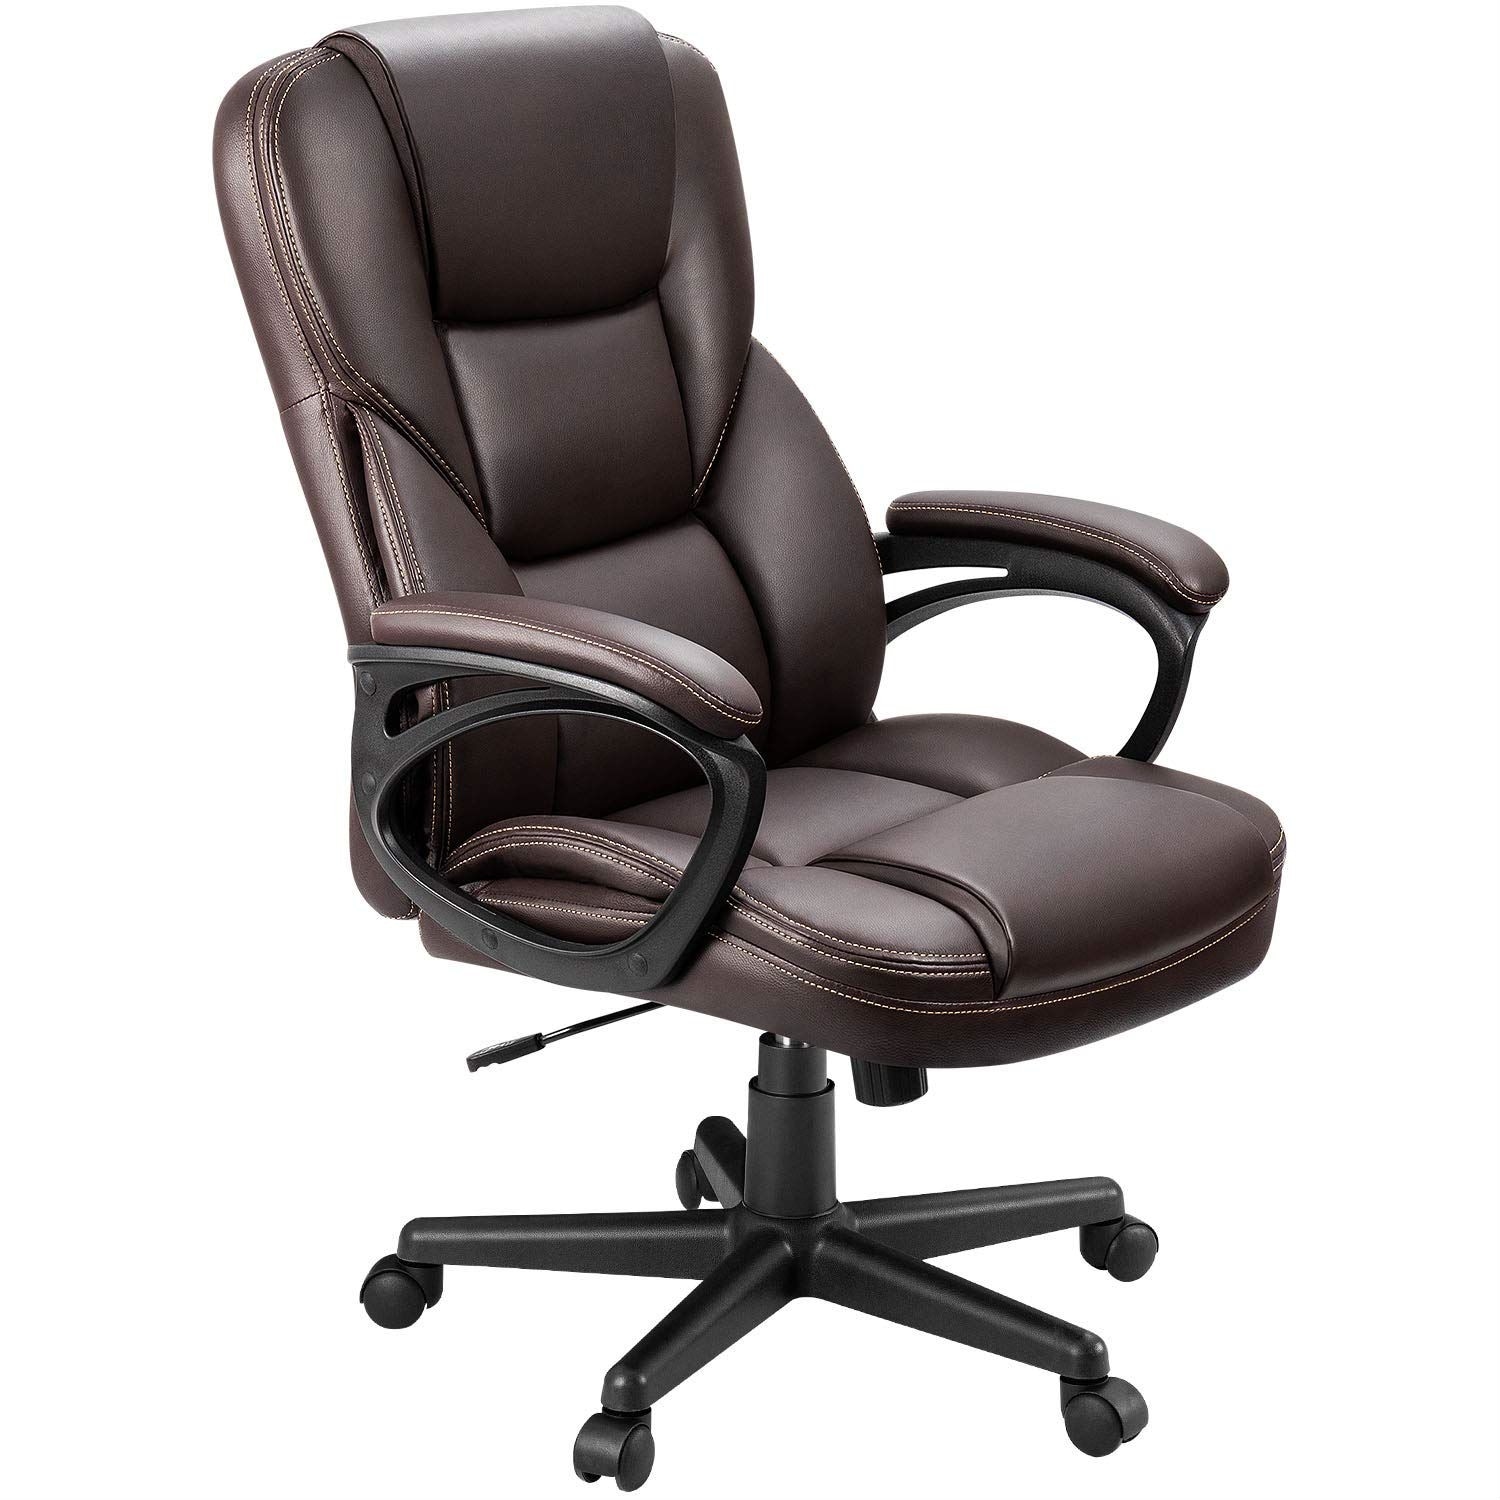 https://ak1.ostkcdn.com/images/products/is/images/direct/a824e4029992ebb6fa3683394d5e90e06d24bbb1/Homall-Office-Desk-Chair-High-Back-Exectuive-Ergonomic-Computer-Chair.jpg